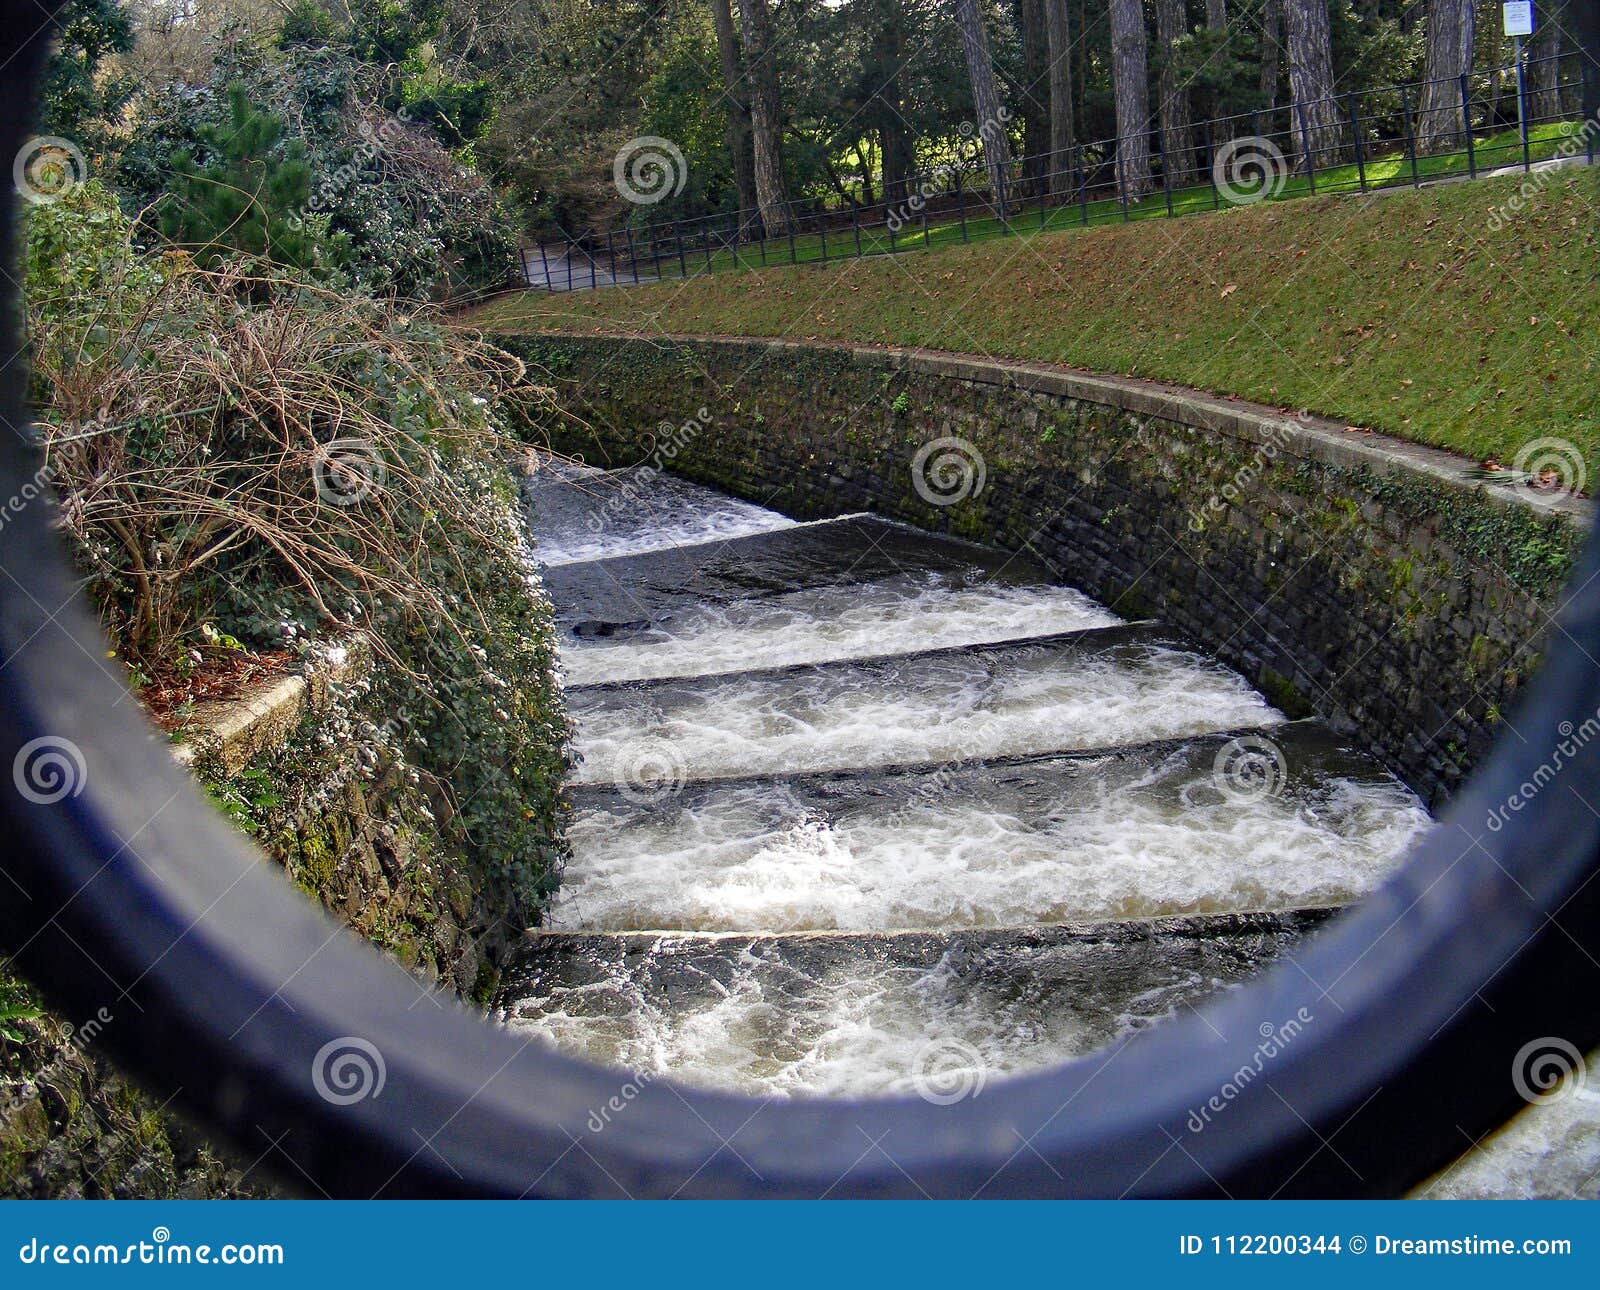 LEVY of WATER FLOWING FAST in PARK Editorial Stock Image - Image of  flowing, bushes: 112200344